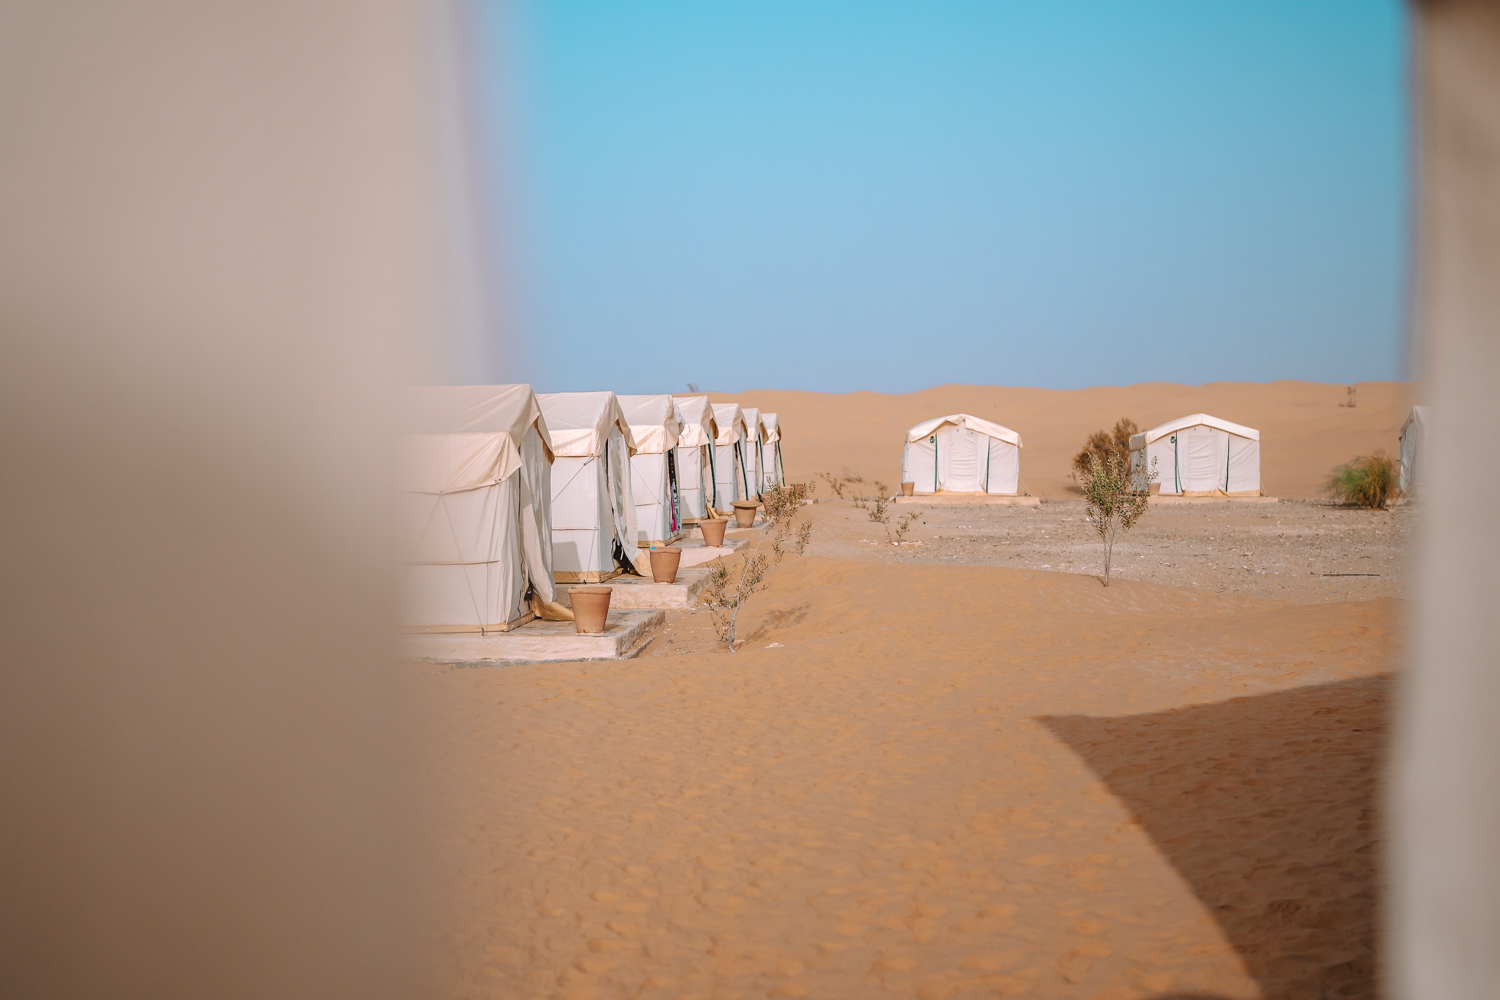 Tents in Campement Zmela, where to stay in Tunisia